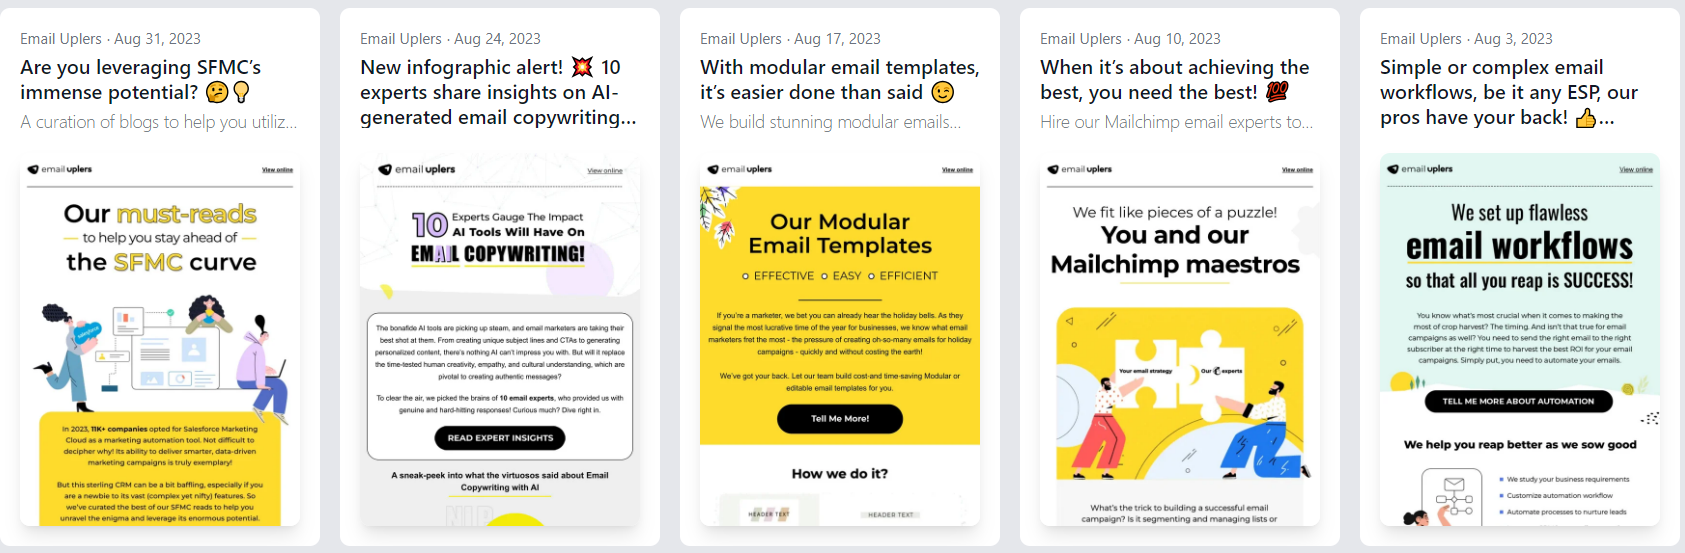 Email Upler’s Email Series for Better Engagement
